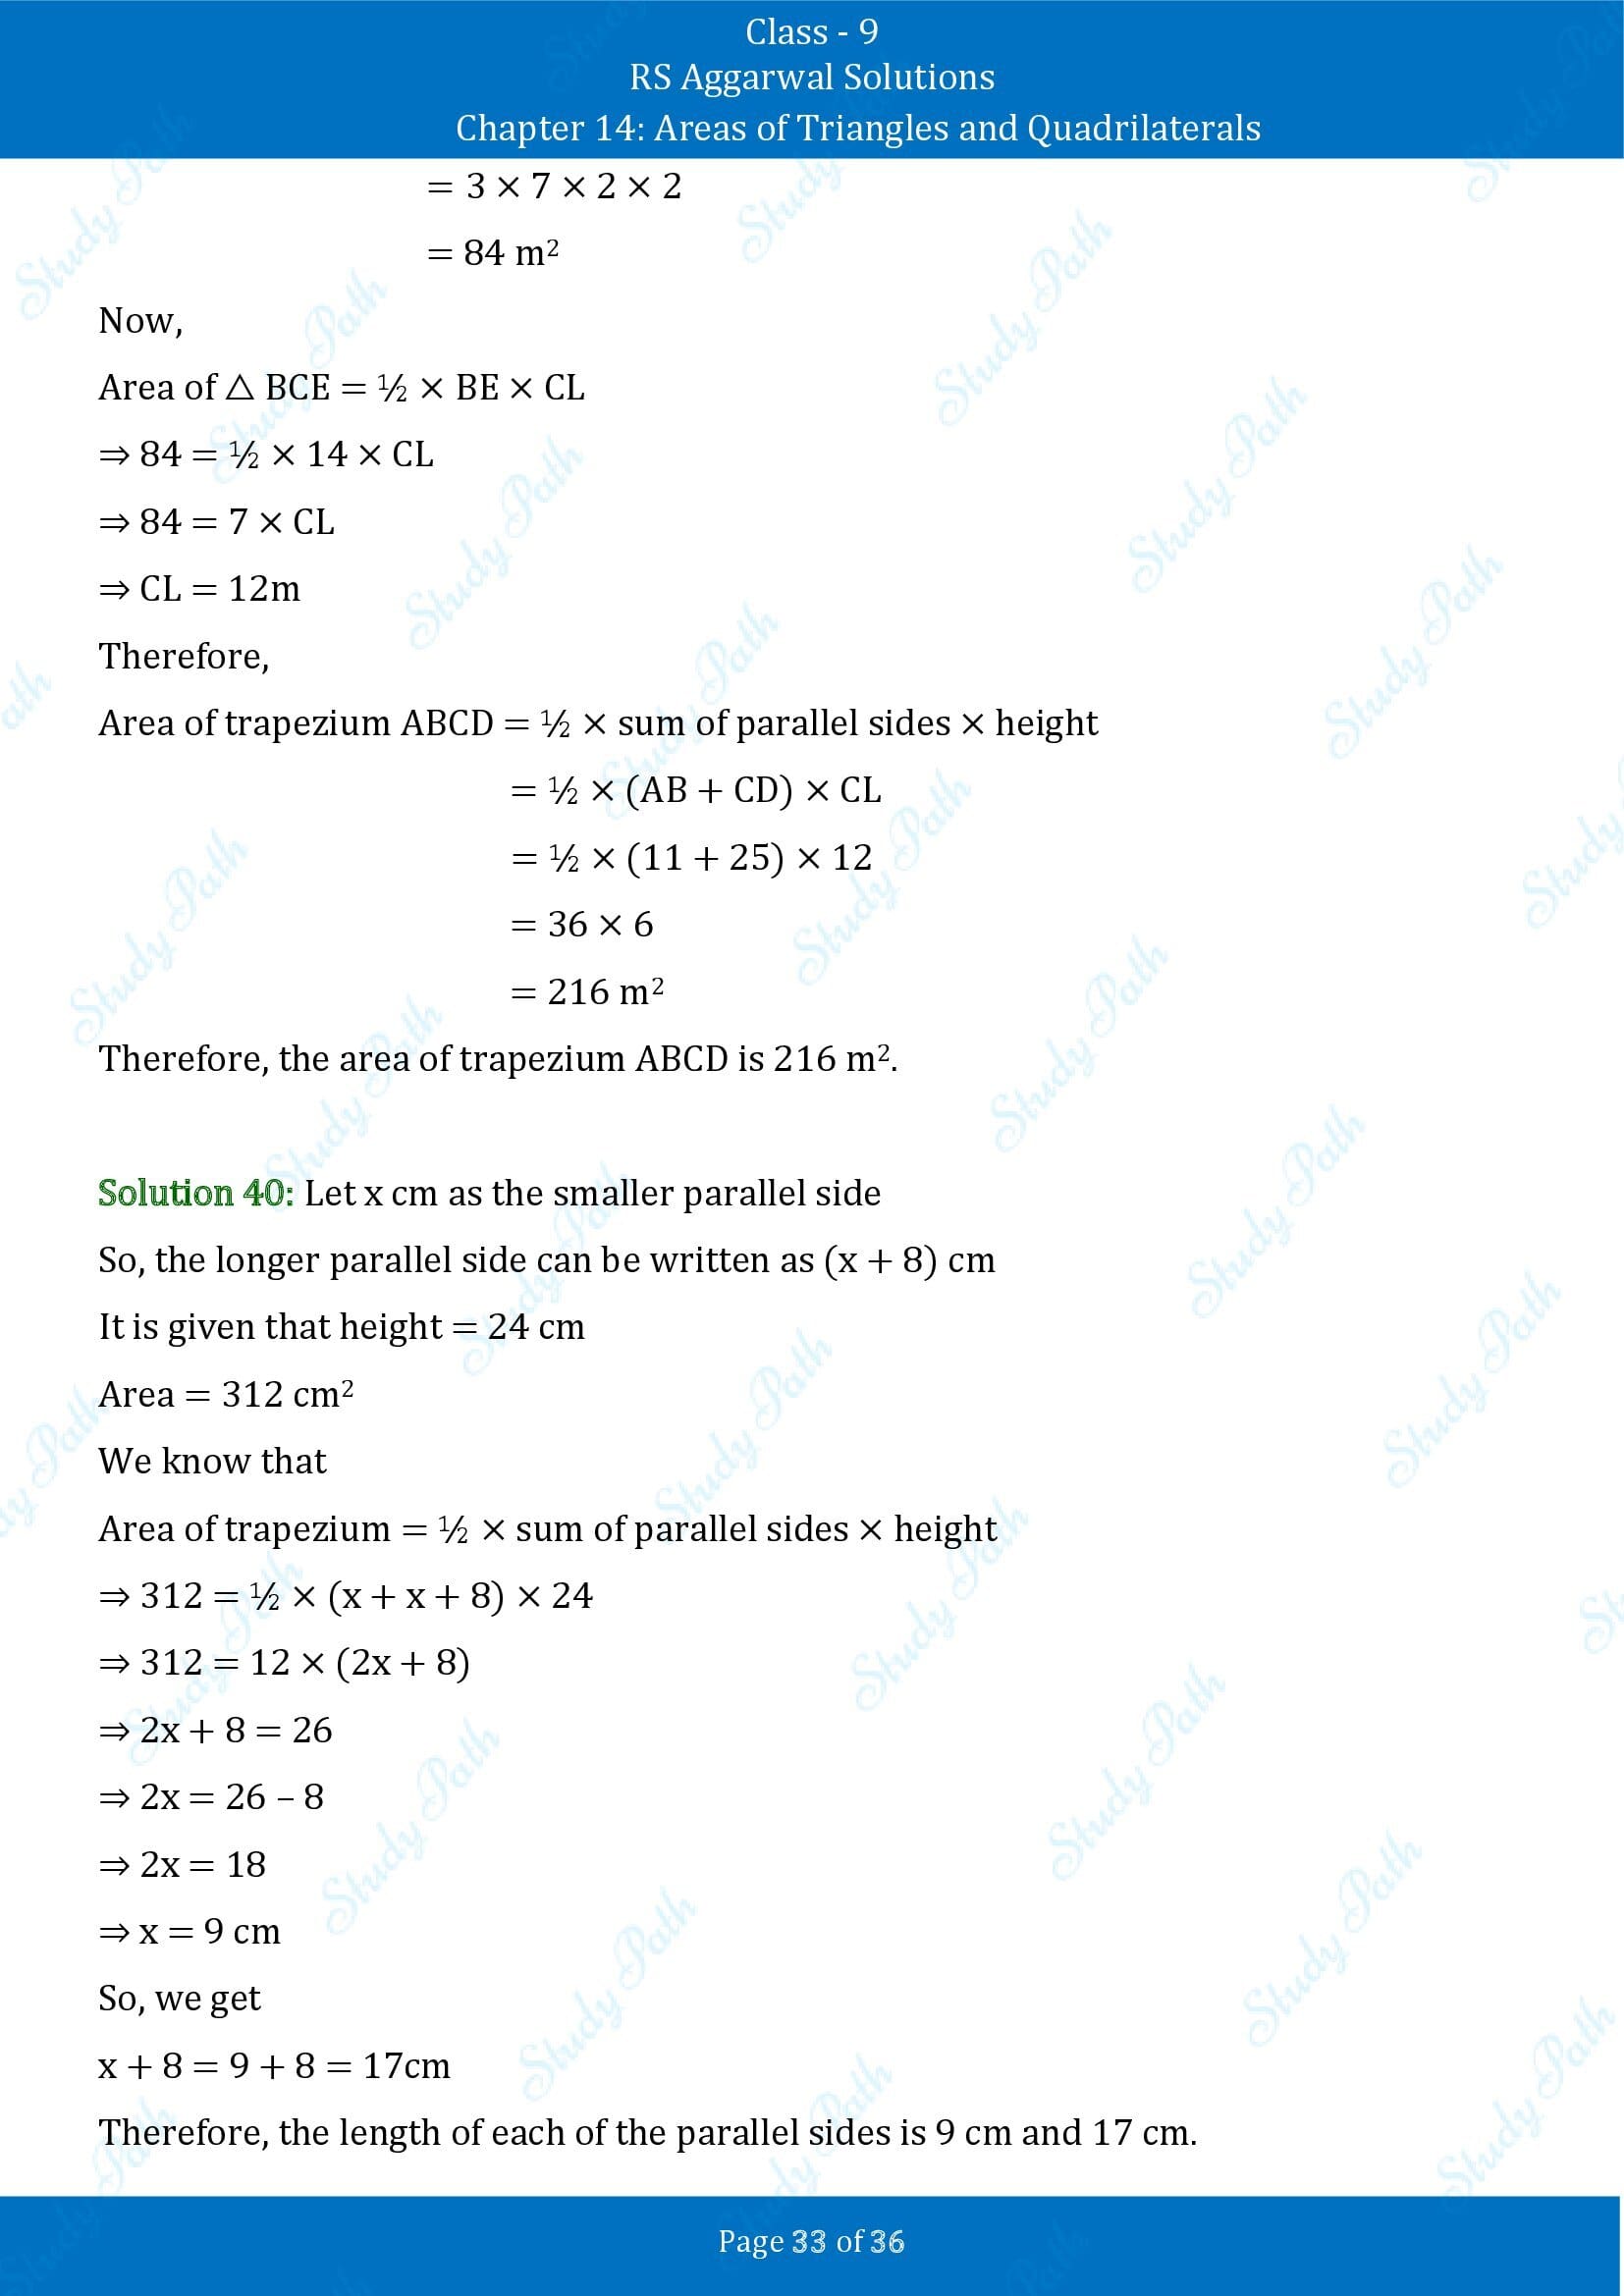 RS Aggarwal Solutions Class 9 Chapter 14 Areas of Triangles and Quadrilaterals Exercise 14 00033